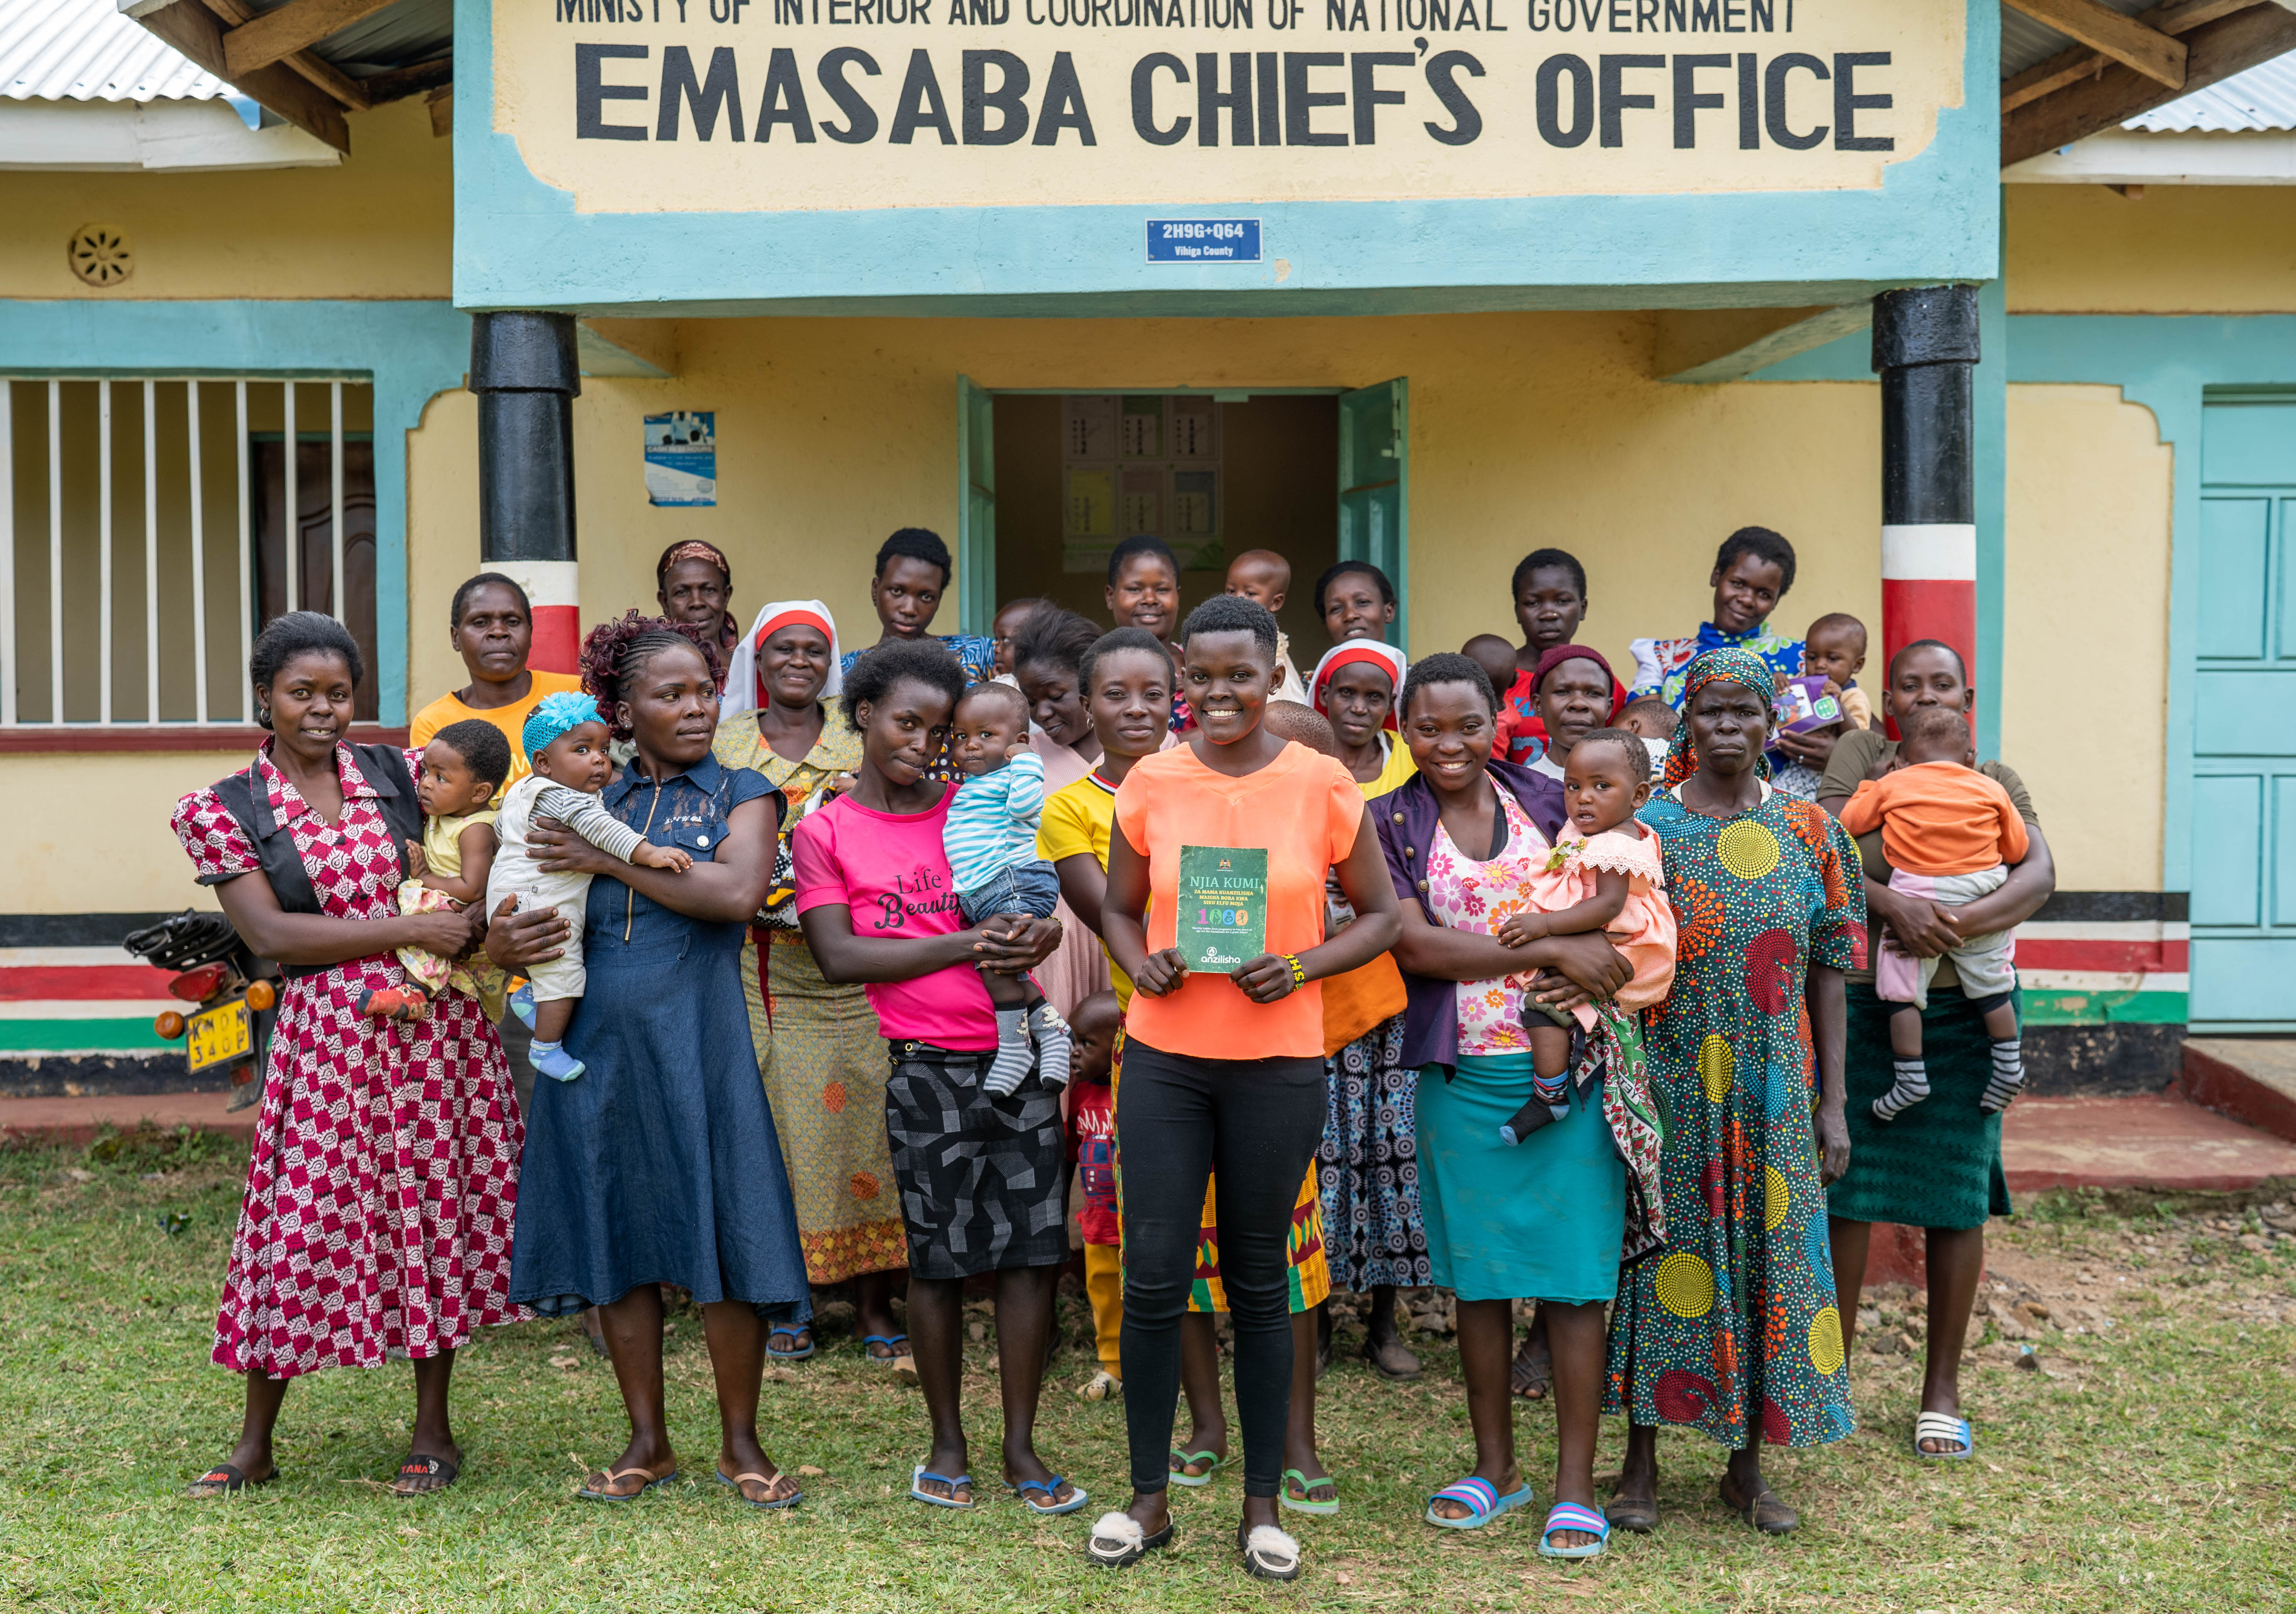 Member's of the mother-to-mother support group stand in front of the Embasaba Chief's Office